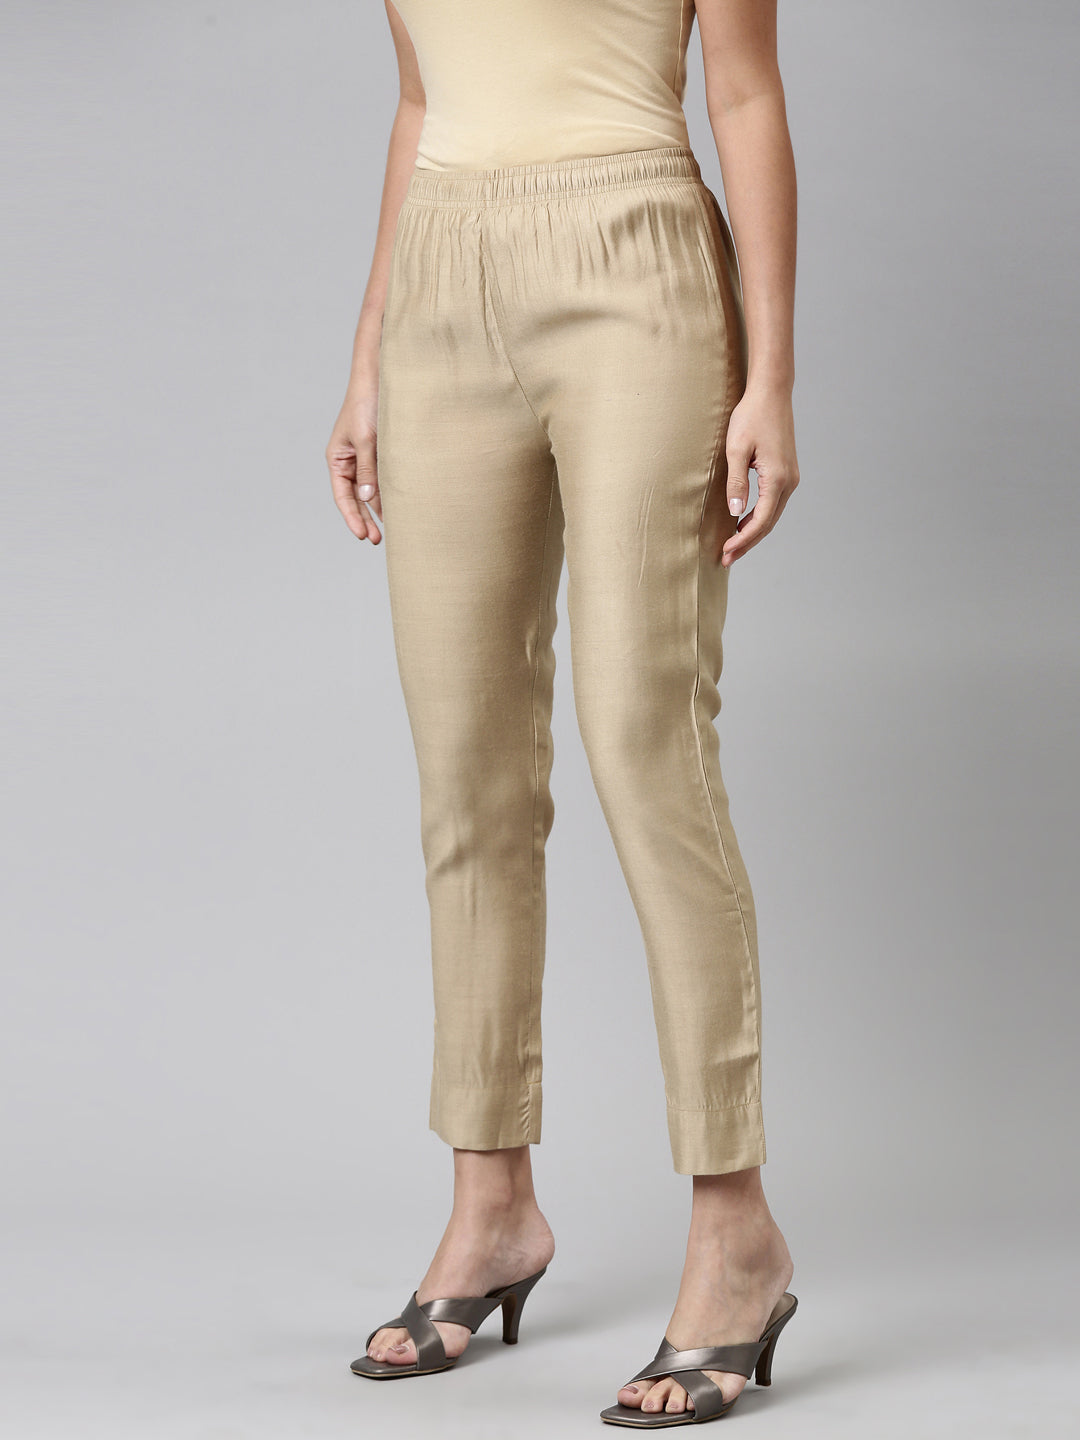 Buy Gold Parallel Pants Online - Shop for W